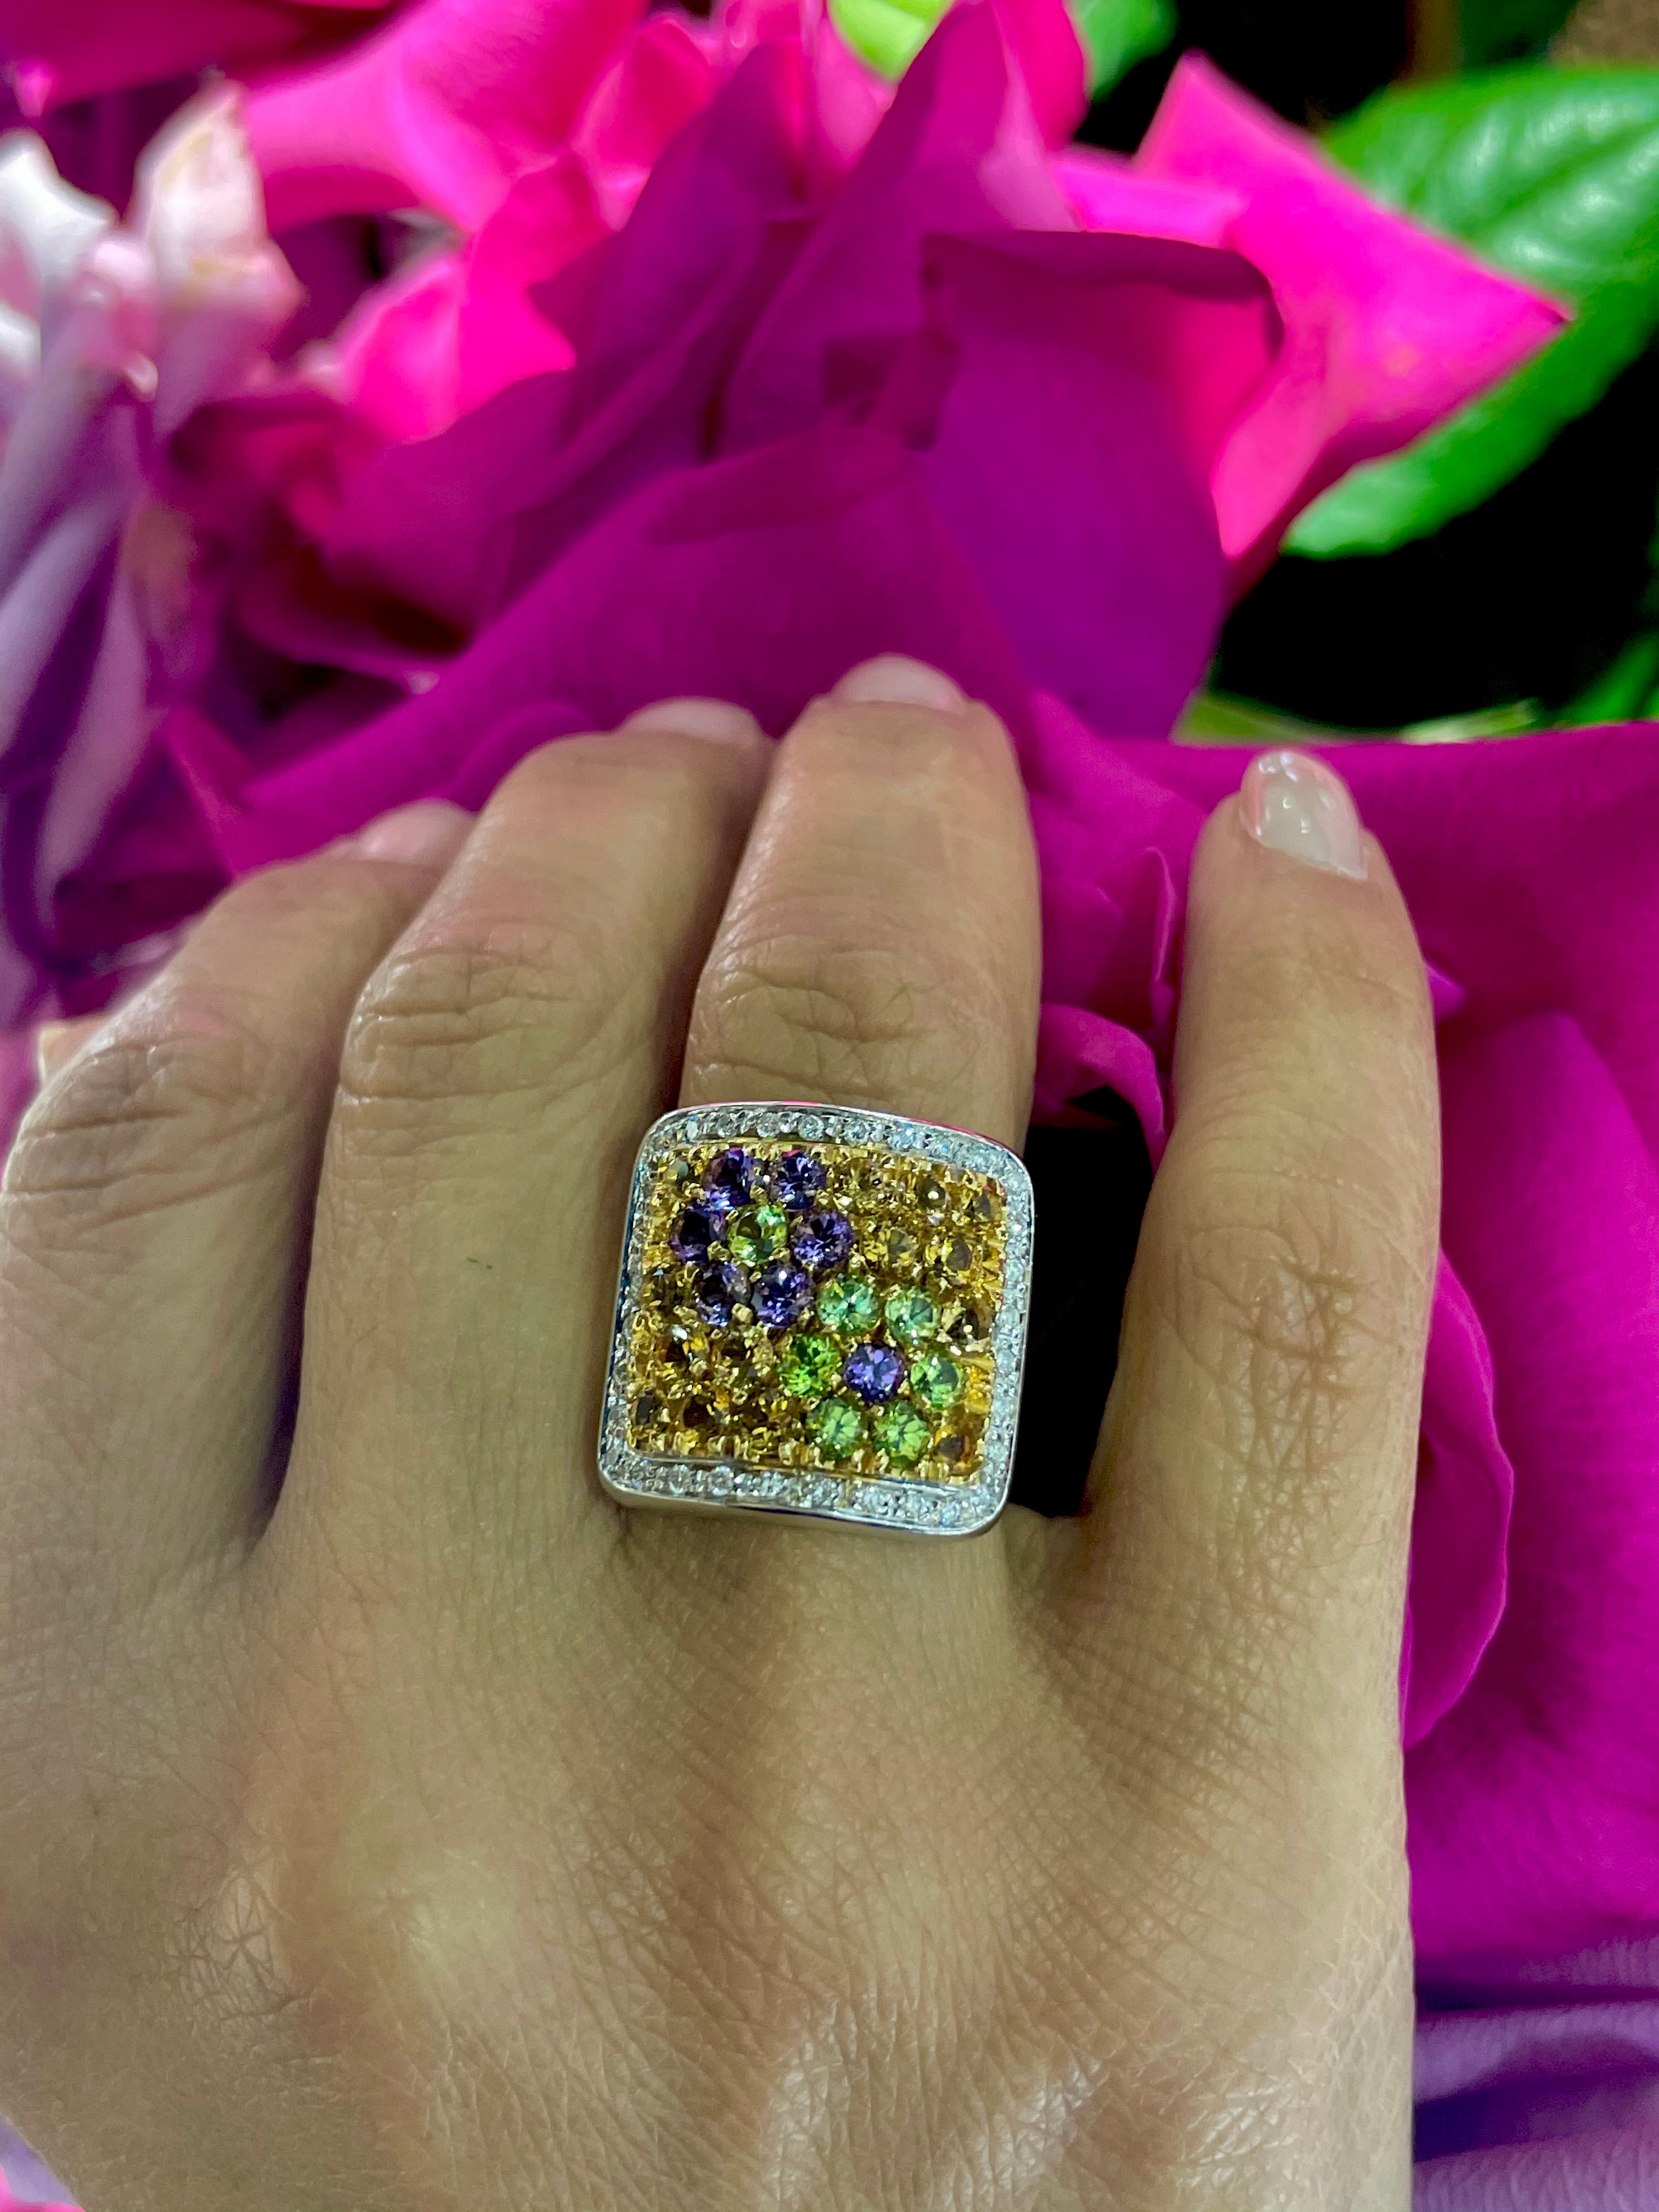 A timeless design, crafted with Pascale Bruni's signature blend of elegance and luxury. This dazzling ring features an 18k two-tone gold band set with 0.32 cts of round diamonds that sparkle alongside the deep purple amethyst and warm yellow citrine stones.